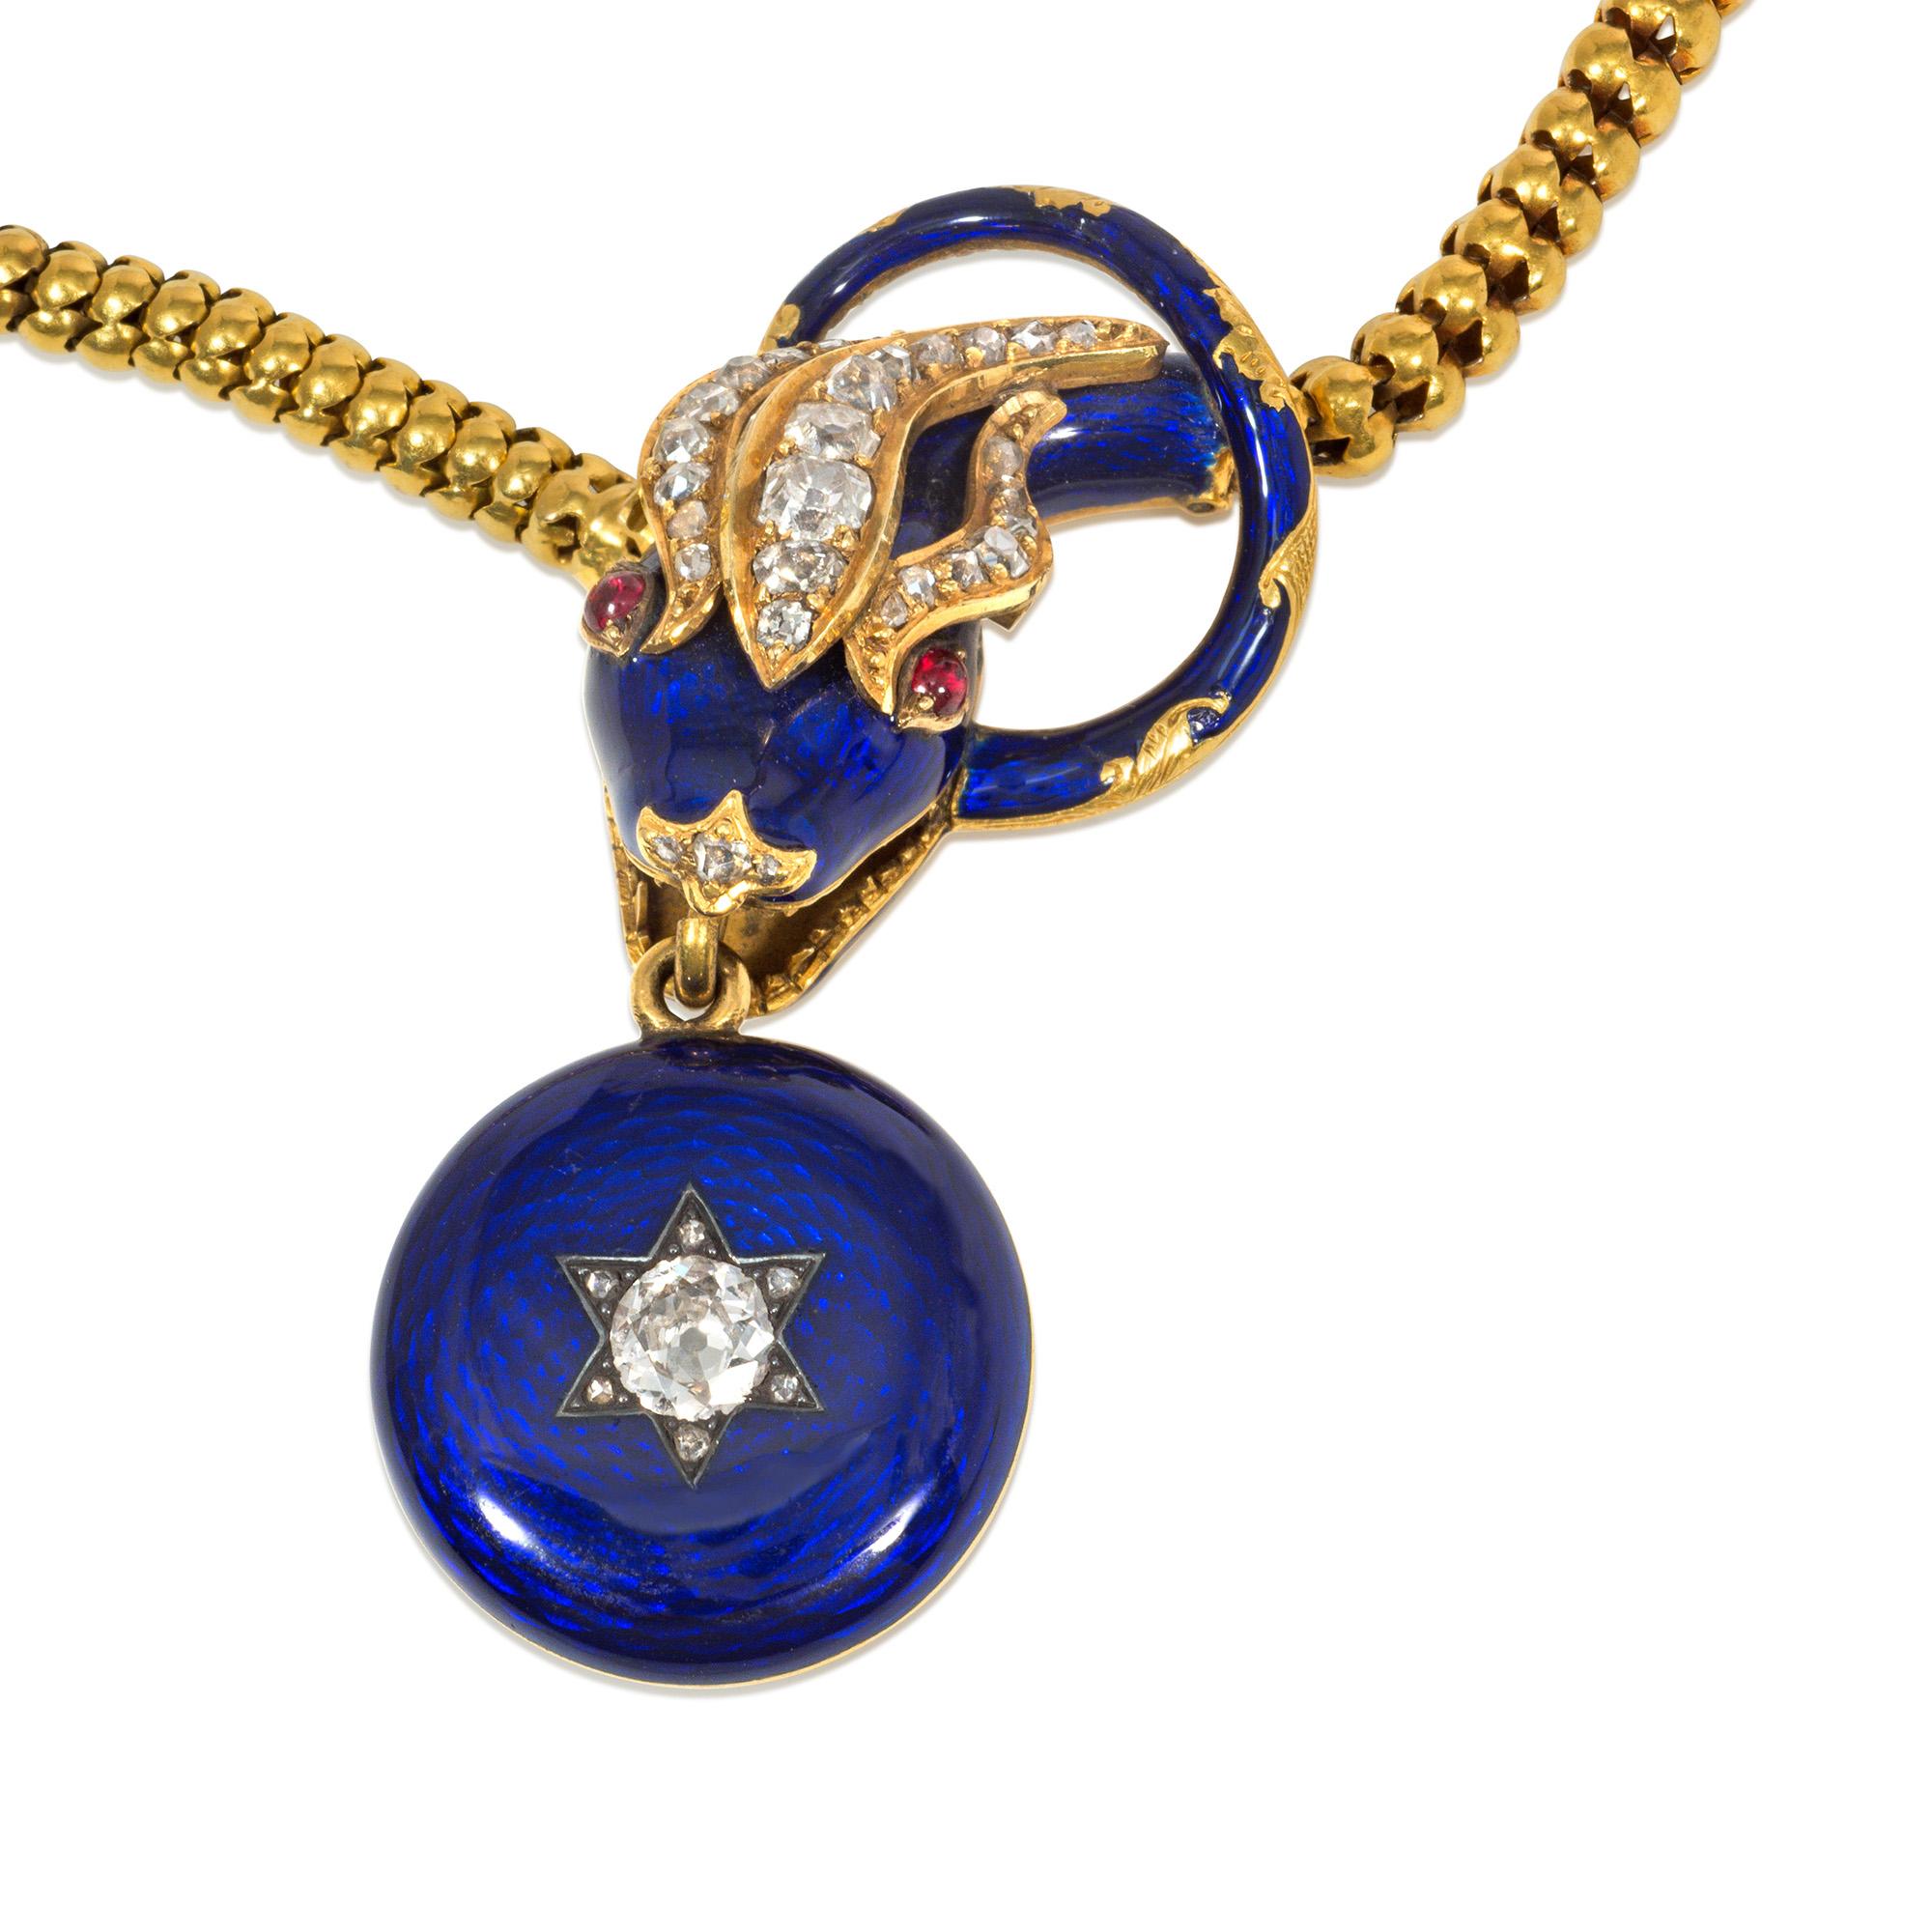 An antique early Victorian gold, enamel, and gemstone necklace designed as an intertwined serpent with a gold, blue enamel, and old mine diamond-set head with ruby eyes, suspending a circular star-set diamond and blue enamel pendant with a locket